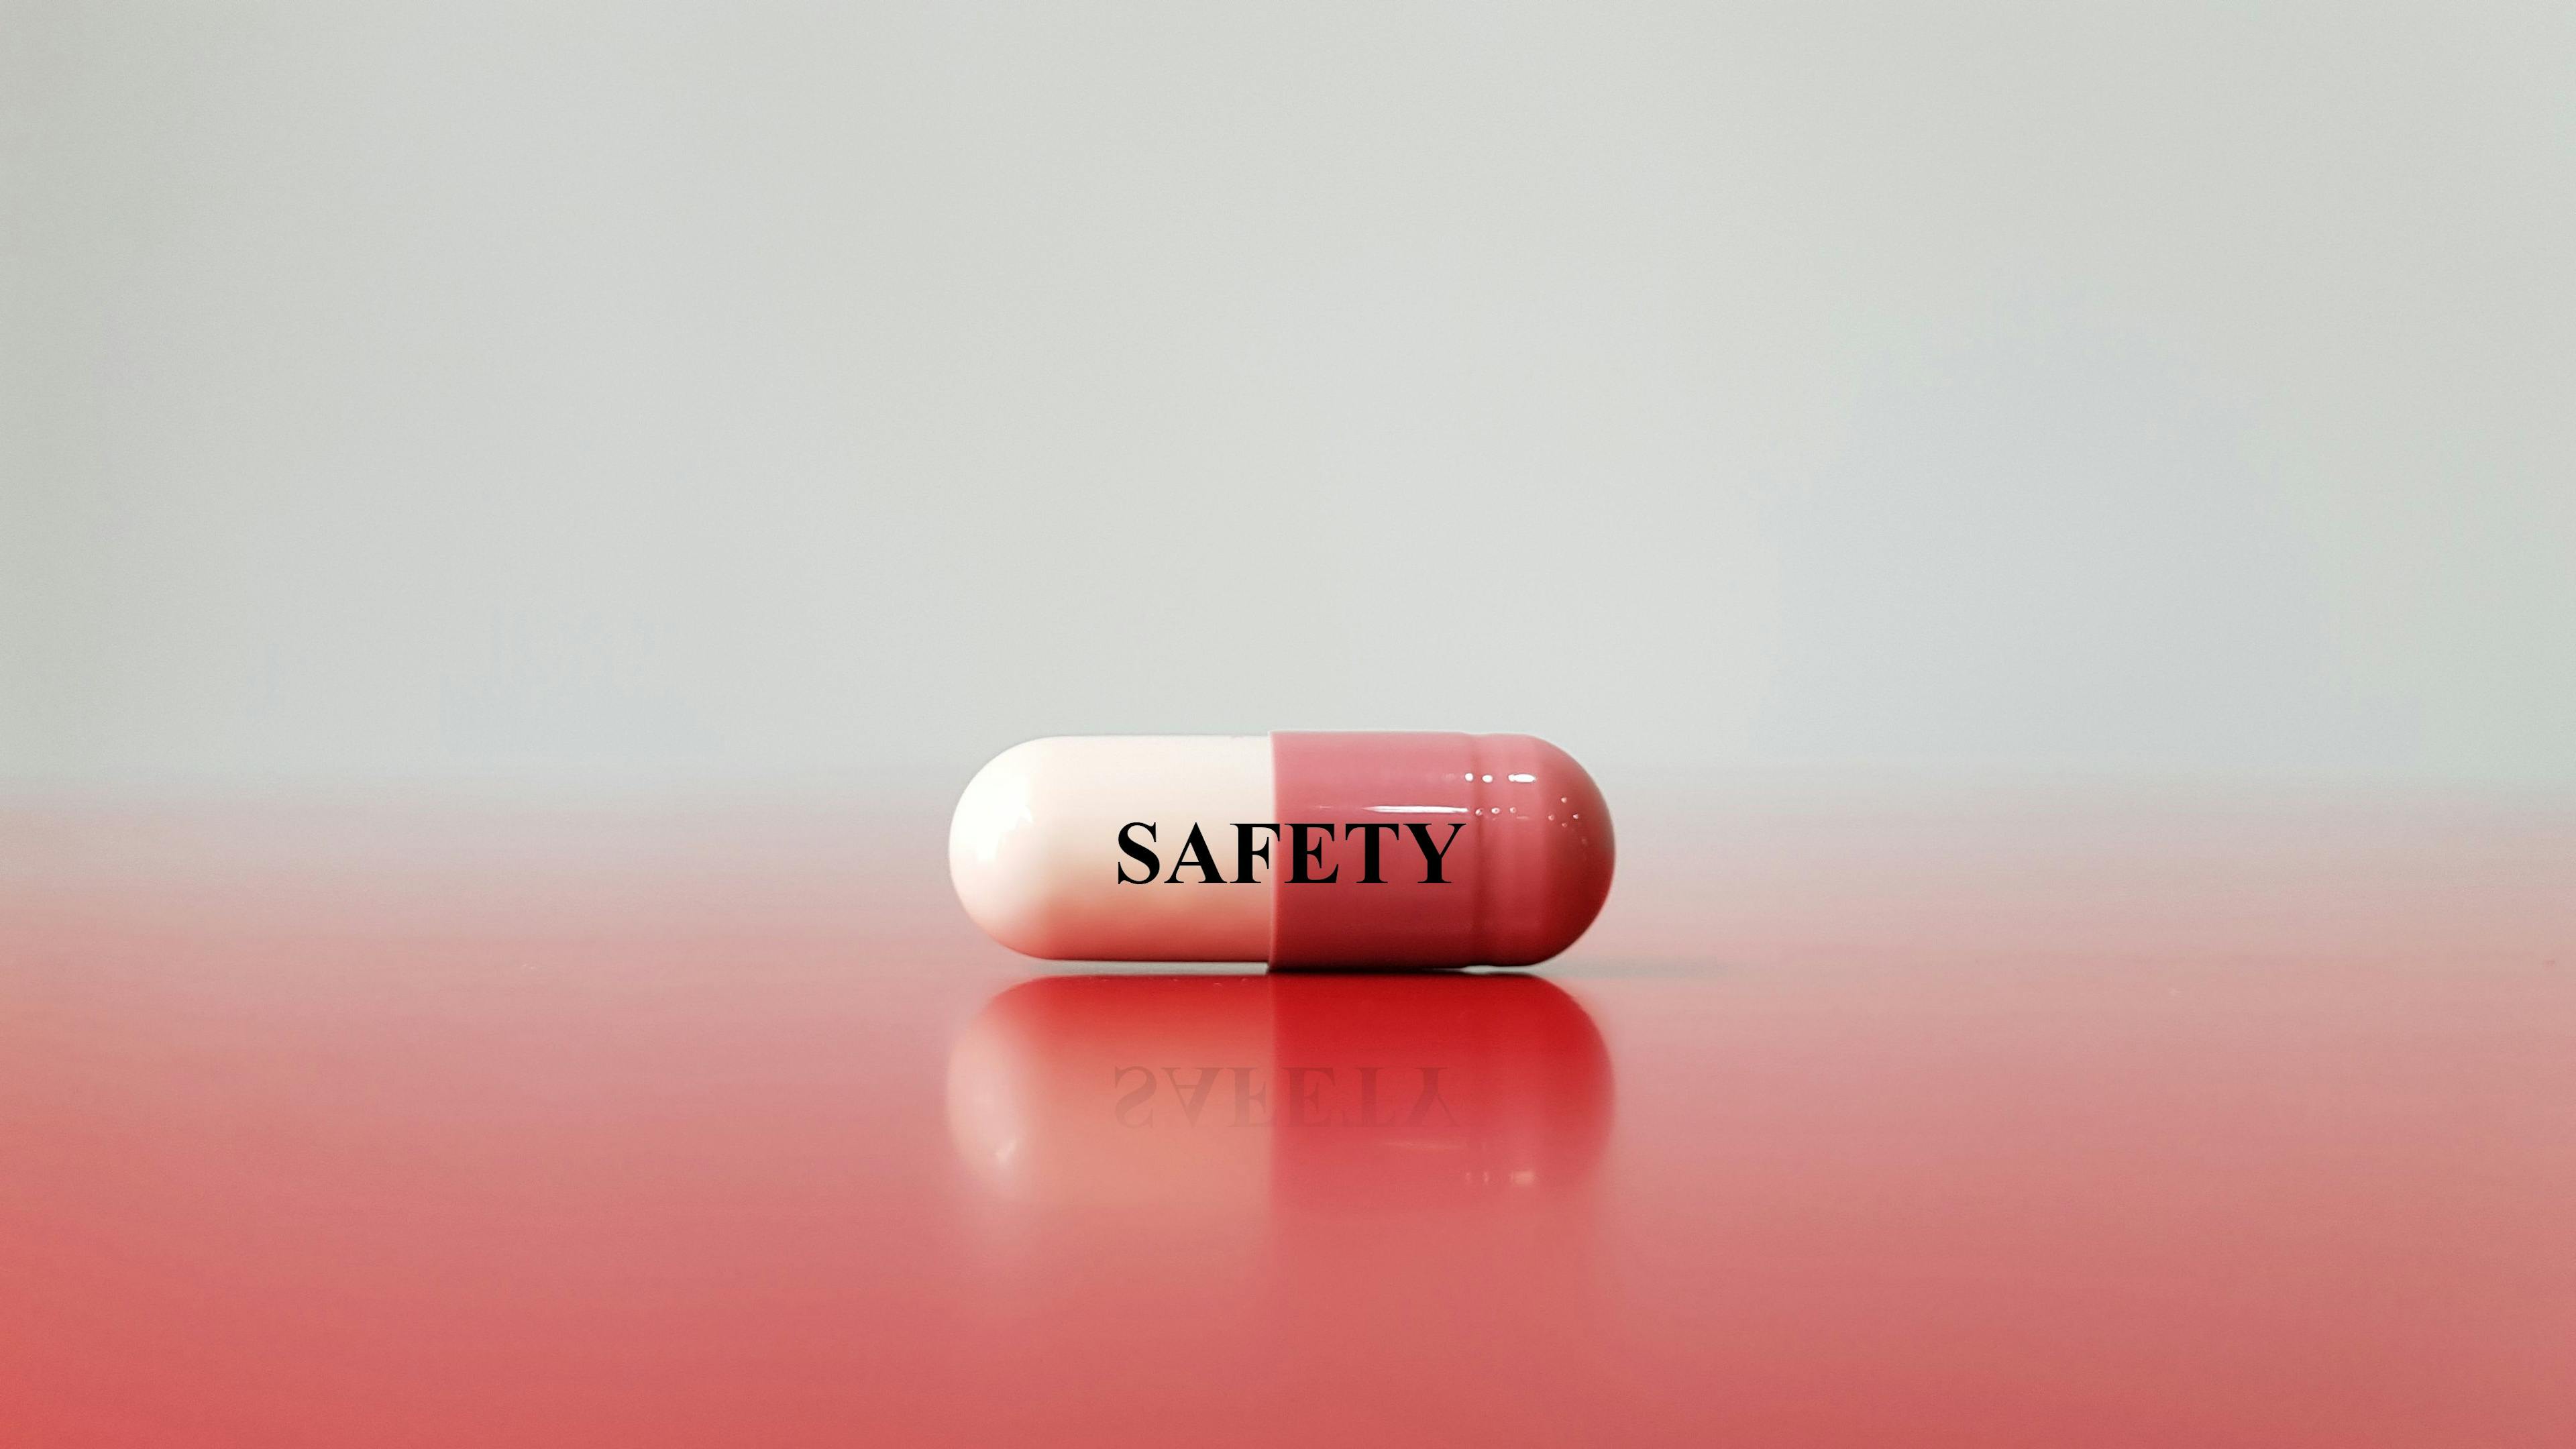 Pharmacovigilance (PV or PhV), also known as drug safety, is the pharmacological science to detection, monitoring, and prevention of adverse effects with pharmaceutical product. Medical safety concept ©Joel bubble ben- stock.adobe.com.